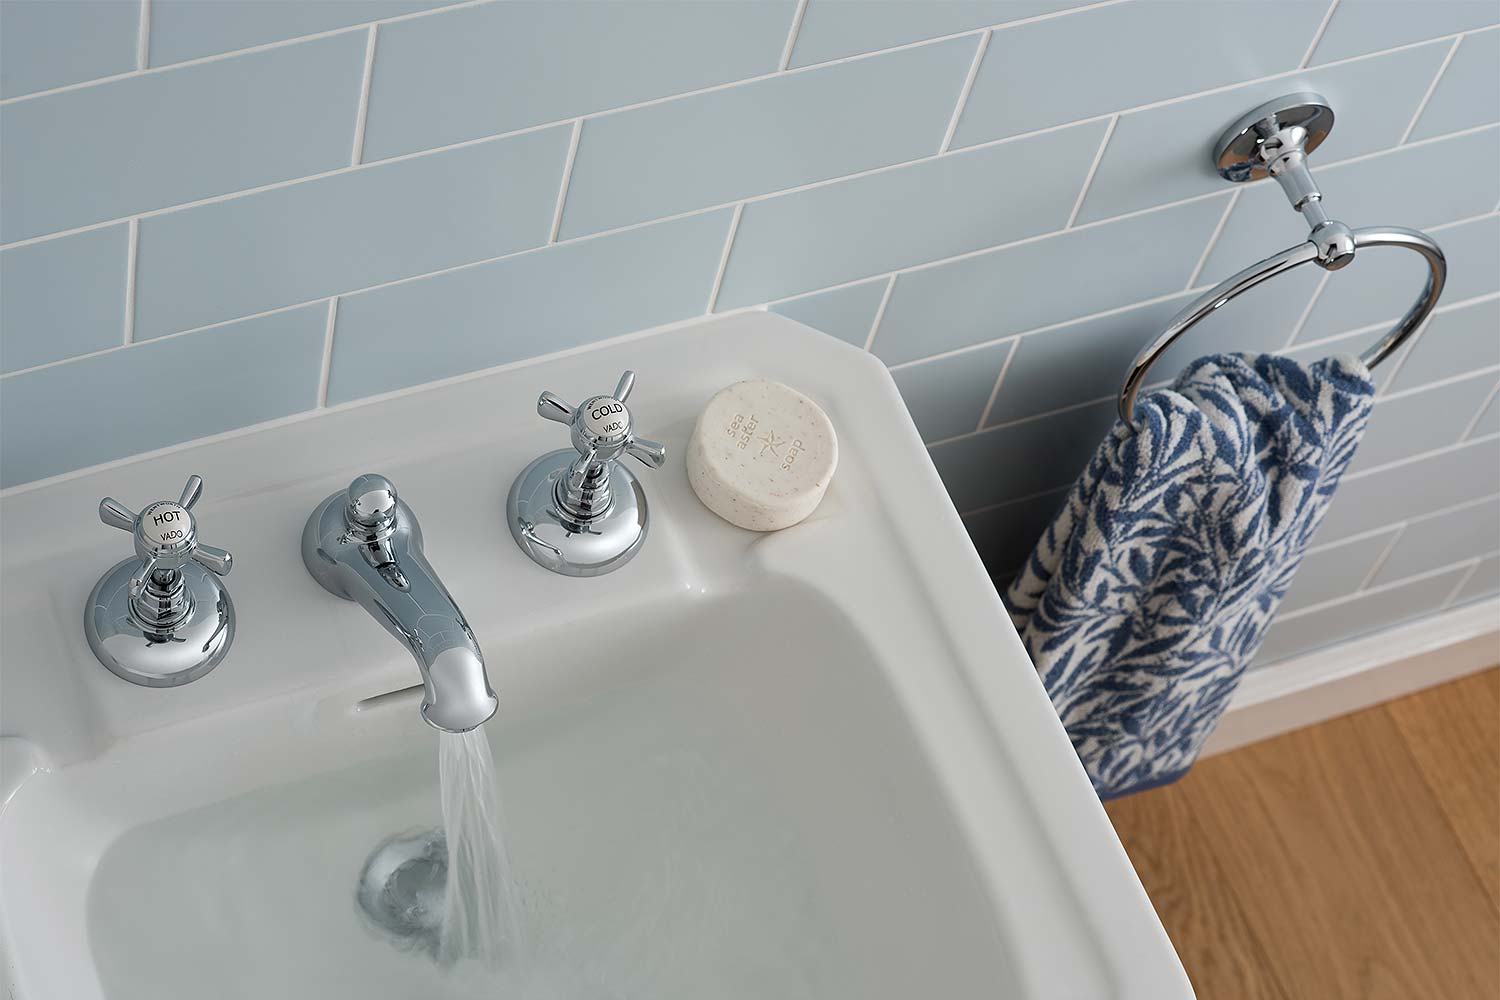 A traditional three hole deck mounted basin mixer on a white basin with a light blue tiled wall, and towel ring with towel.